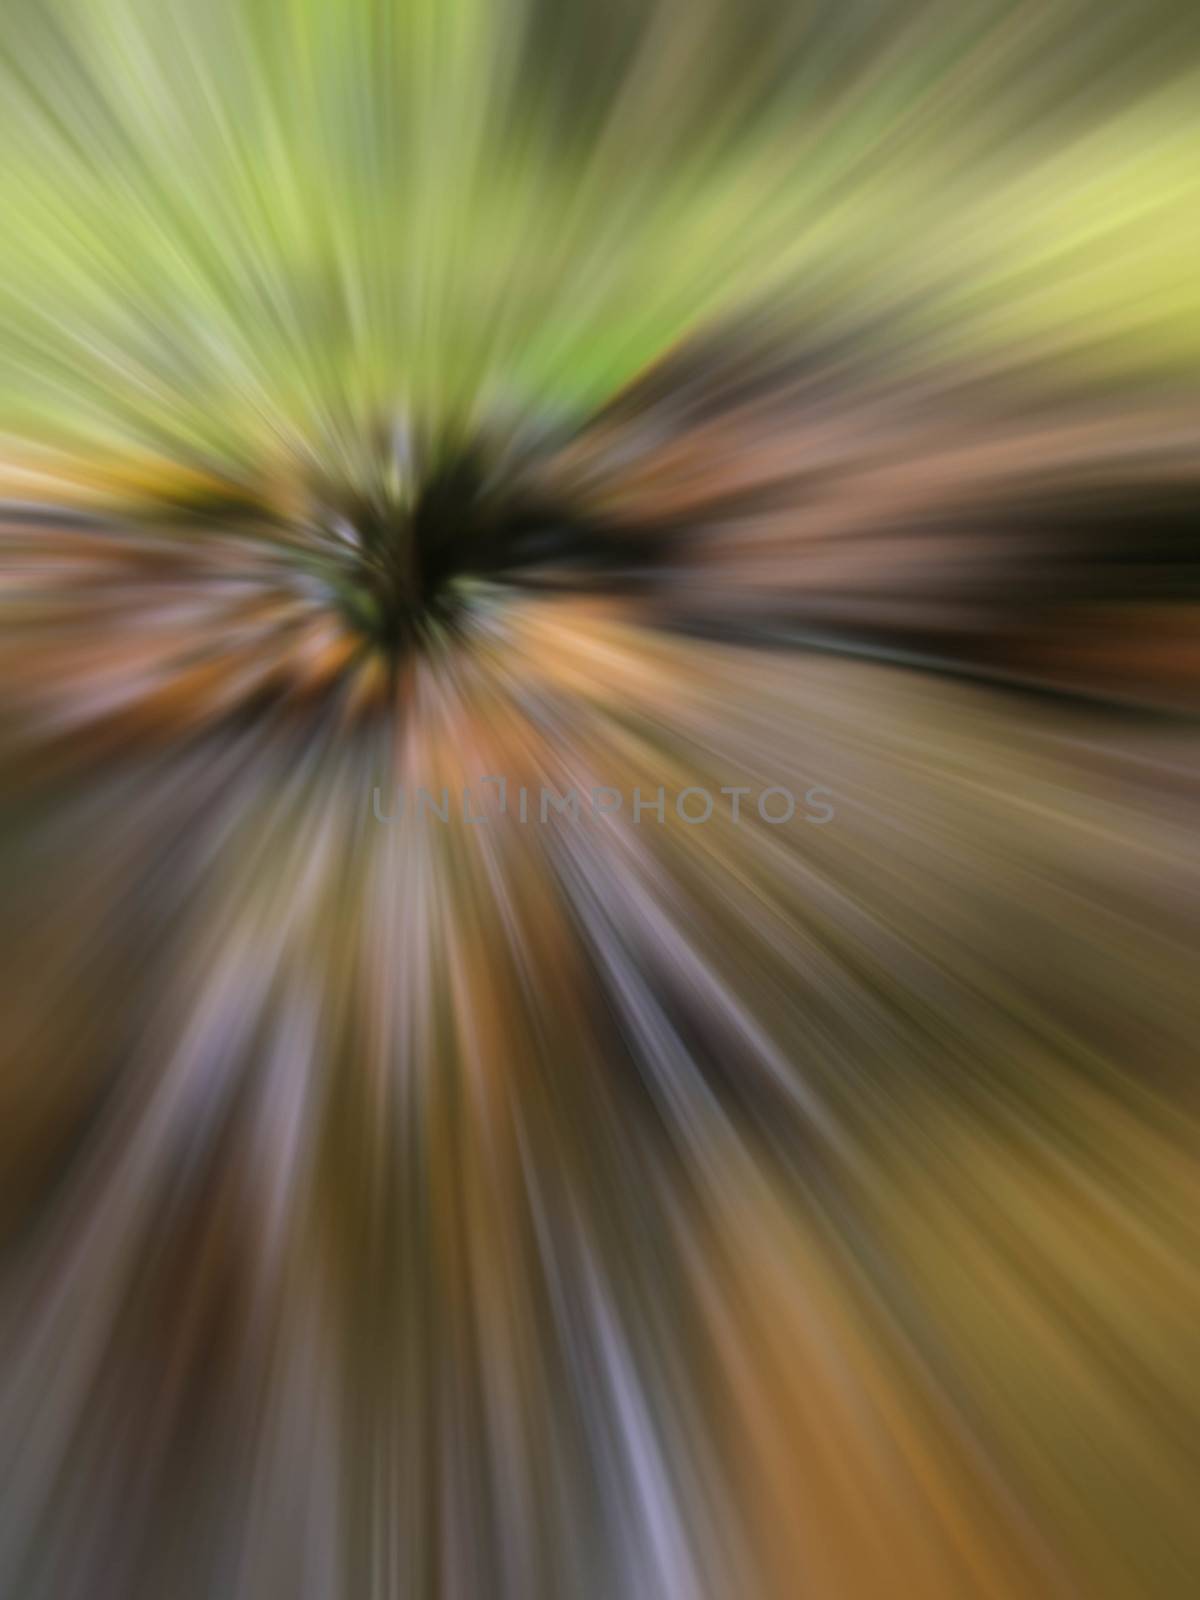 Abstract background image of streaming forest colors that draws the eye in.